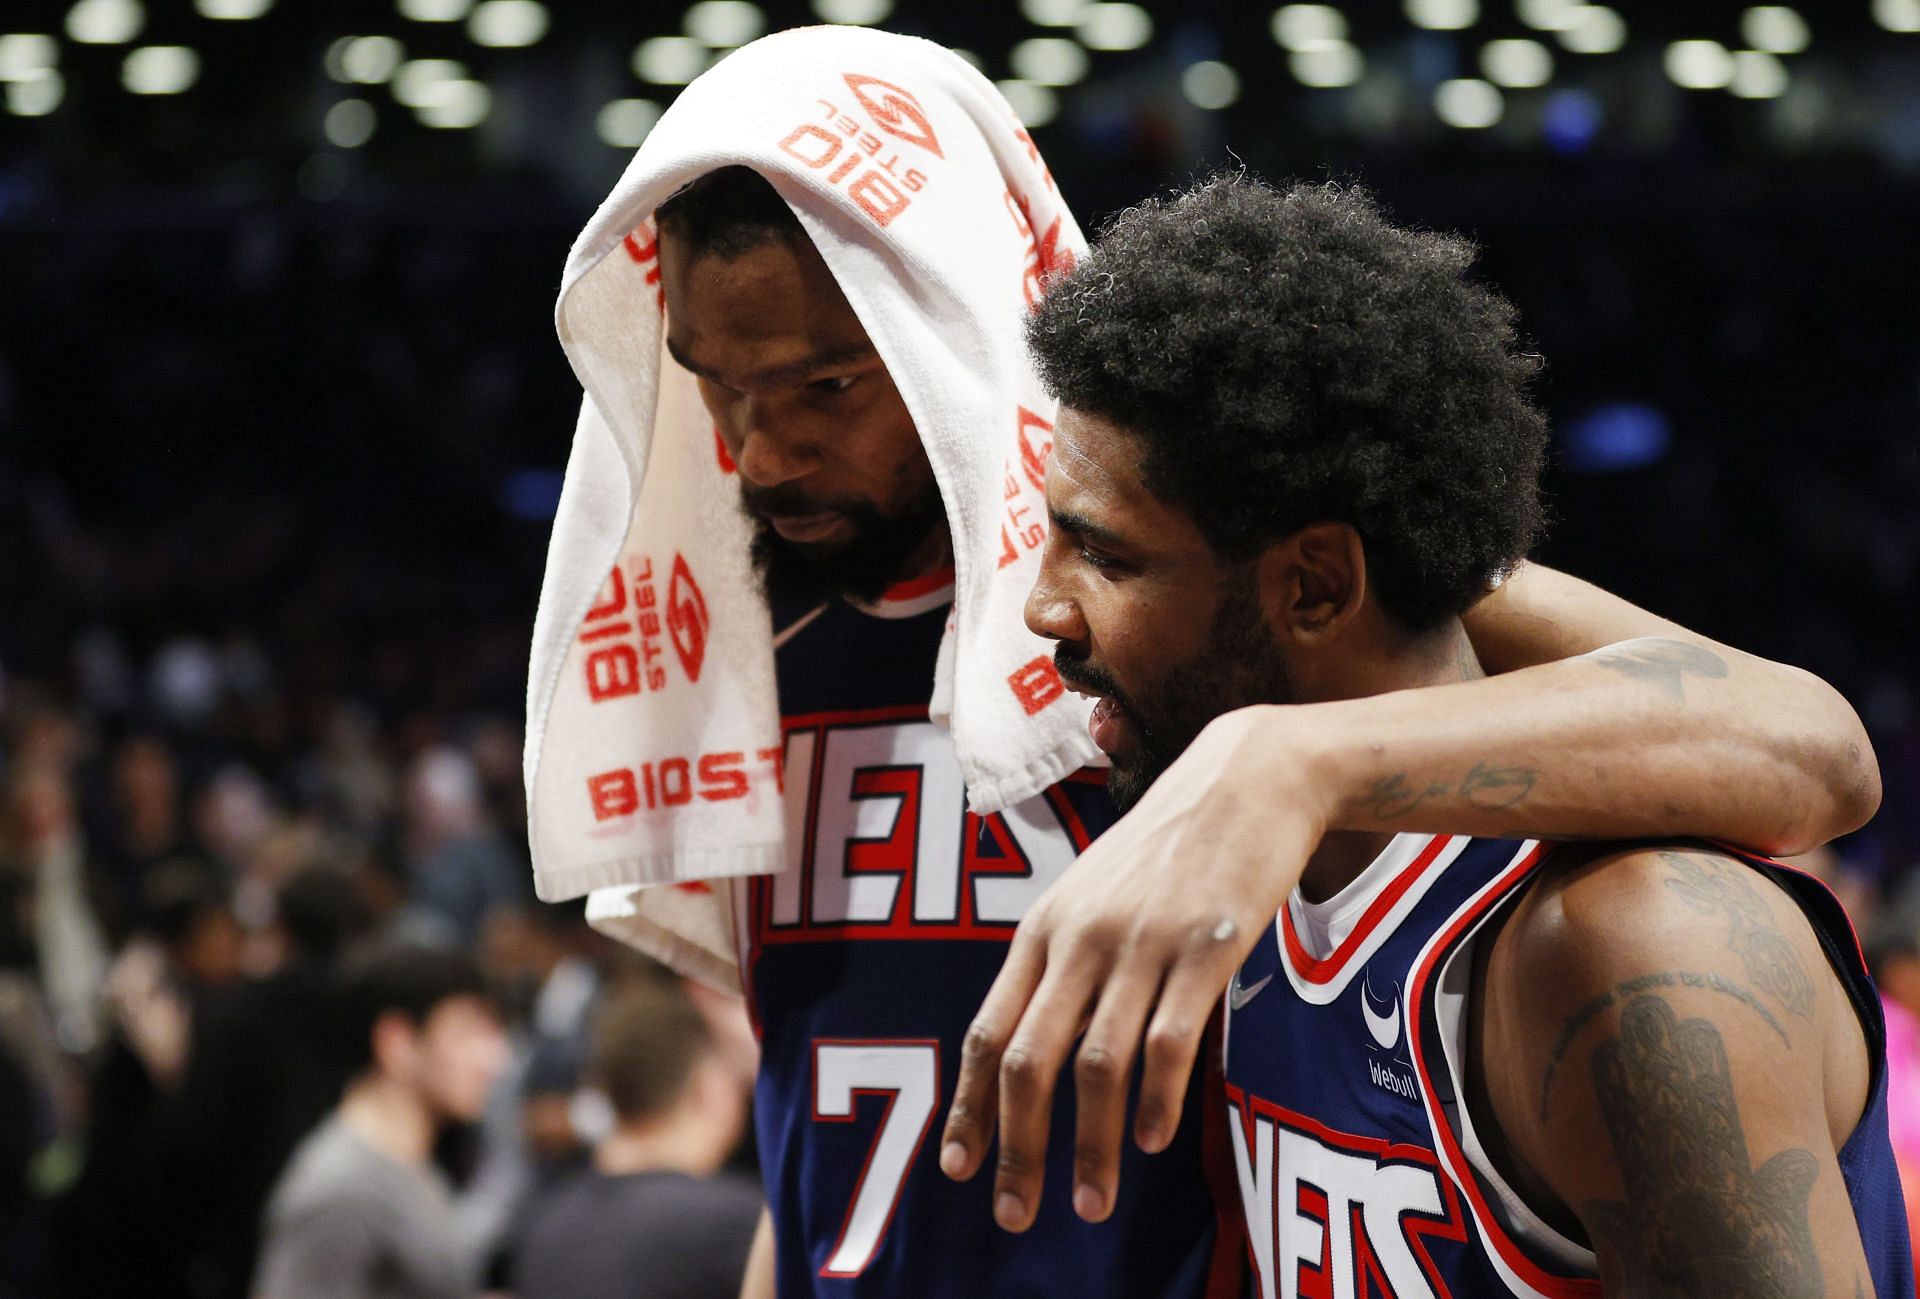 Brooklyn Nets fans are hoping Kyrie Irving and Kevin Durant will ball out this season.